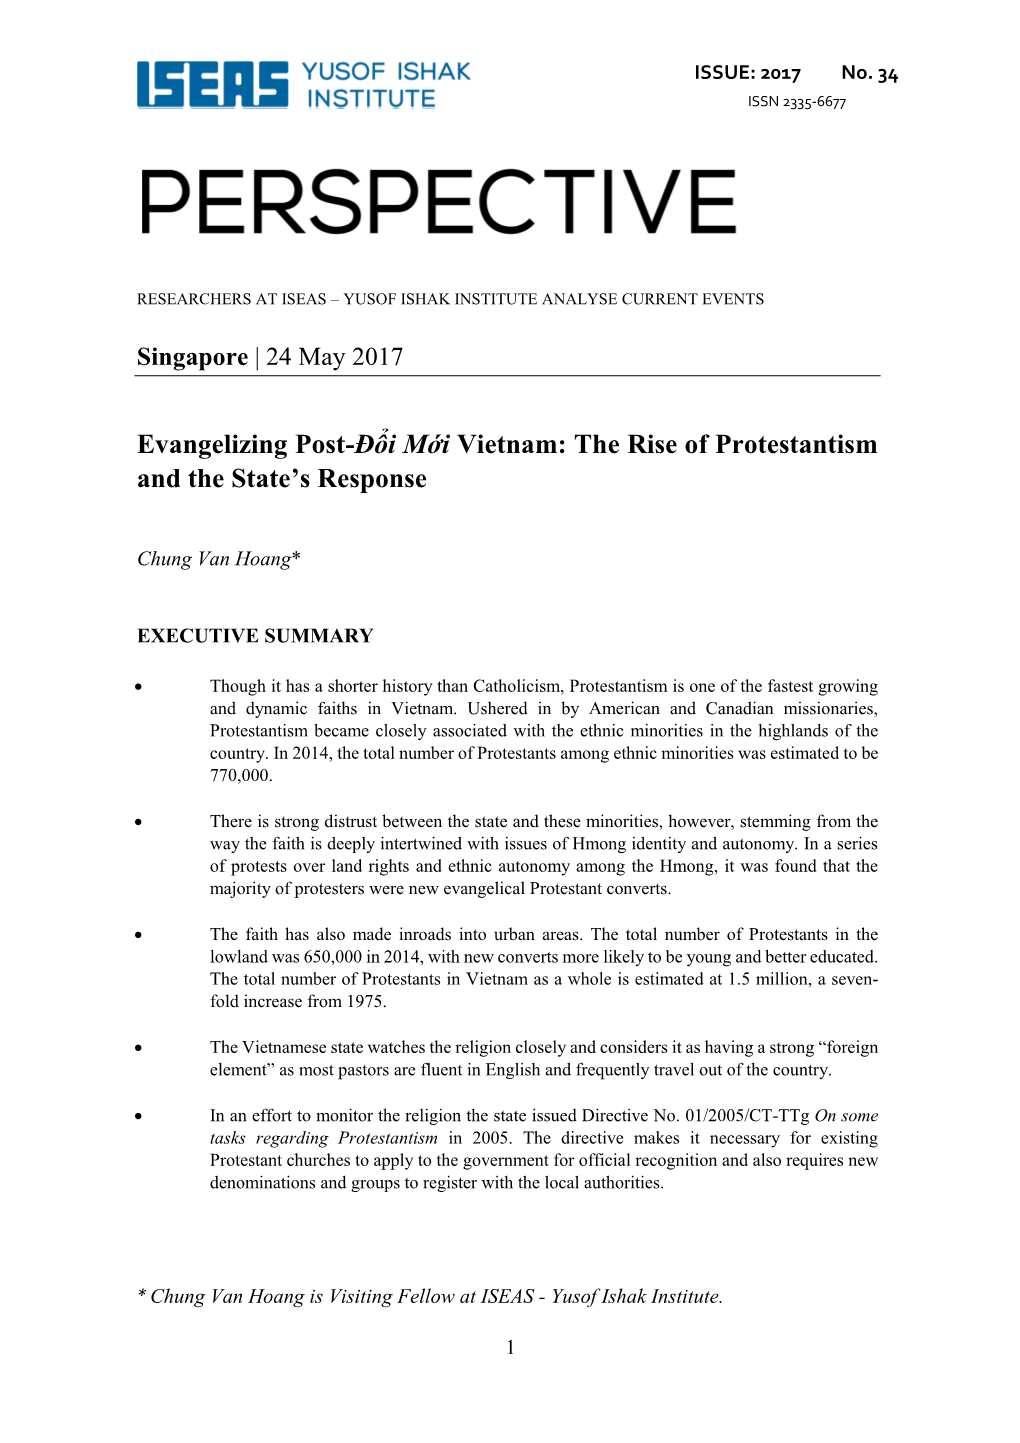 Evangelizing Post-Đổi Mới Vietnam: the Rise of Protestantism and the State’S Response